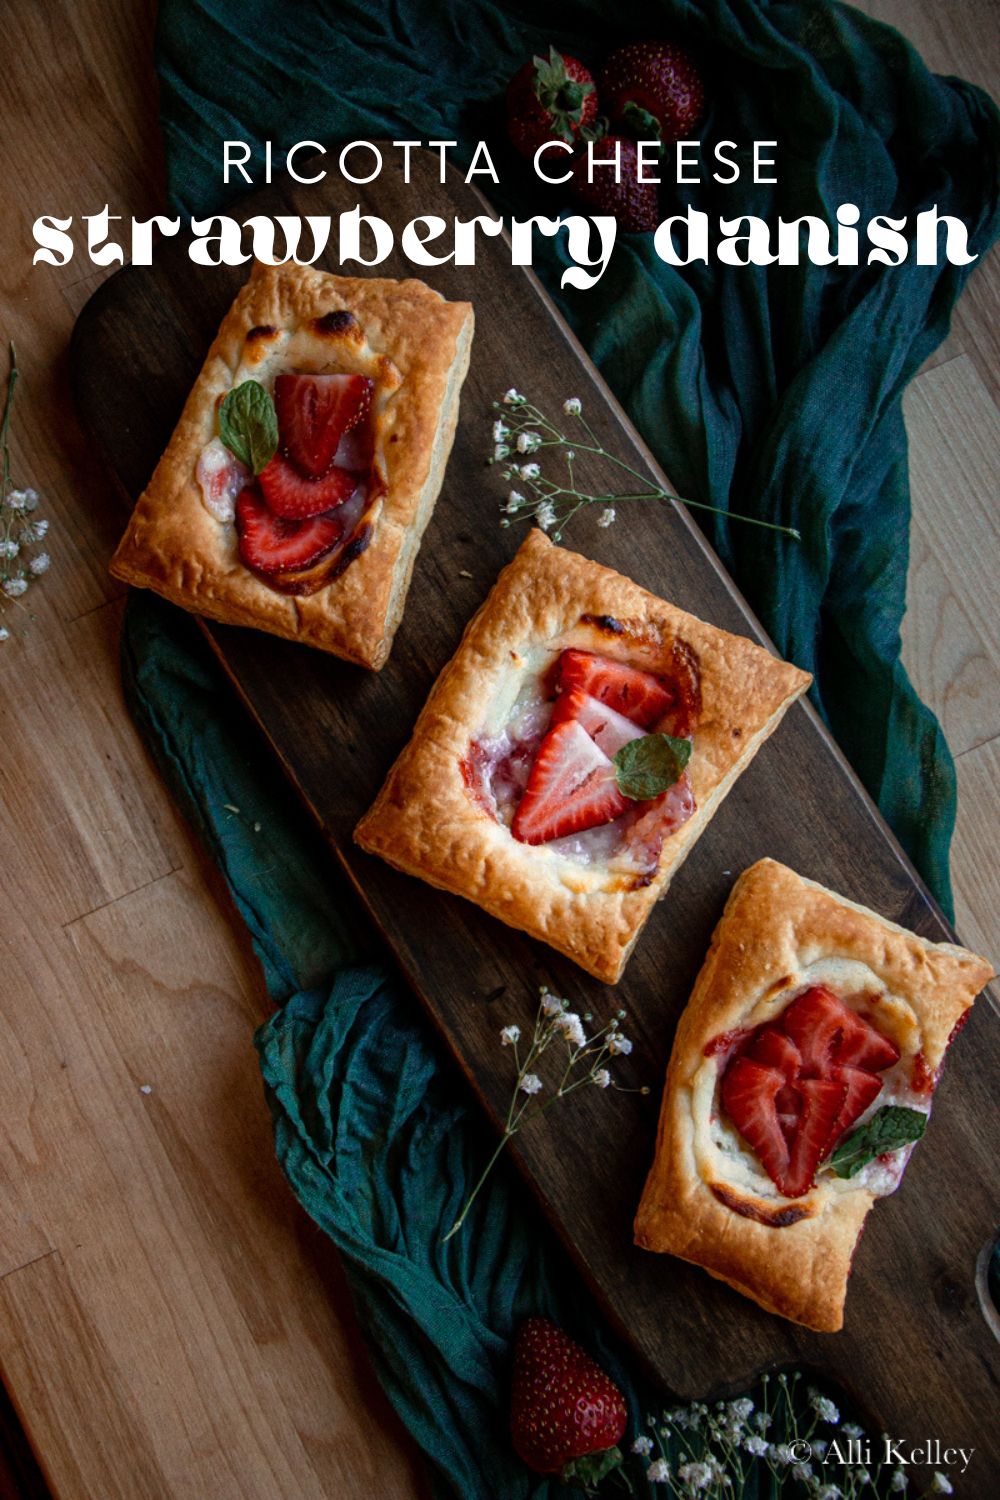 For a delicious breakfast or fruity afternoon treat, this strawberry danish is a perfect choice. With its sweet and creamy filling, flaky crust, and topped with fresh strawberries, my strawberry cheese danish is sure to satisfy your taste buds! Not to mention it is quick and easy, which is ideal for busy mornings.